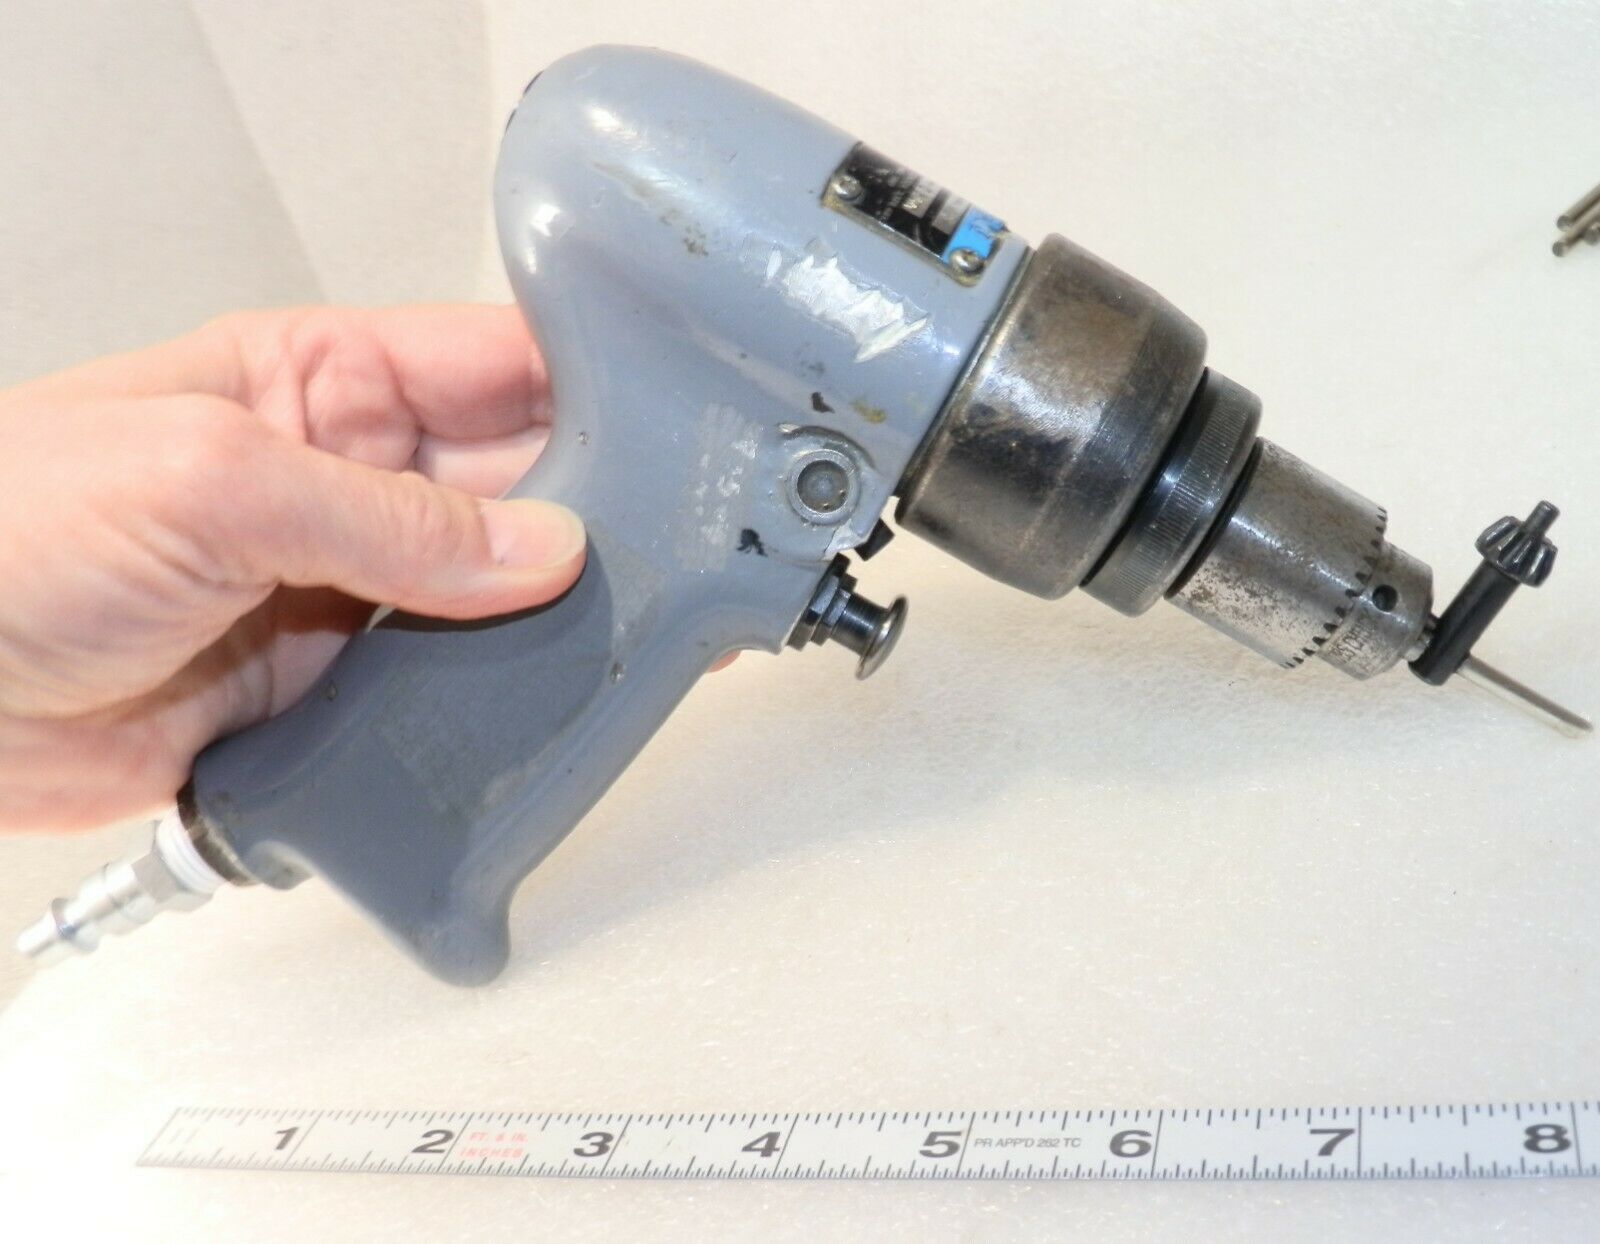 Rockwell 35d303 Model B  Air Powered Drill  With 1/4”   Jacobs Chuck